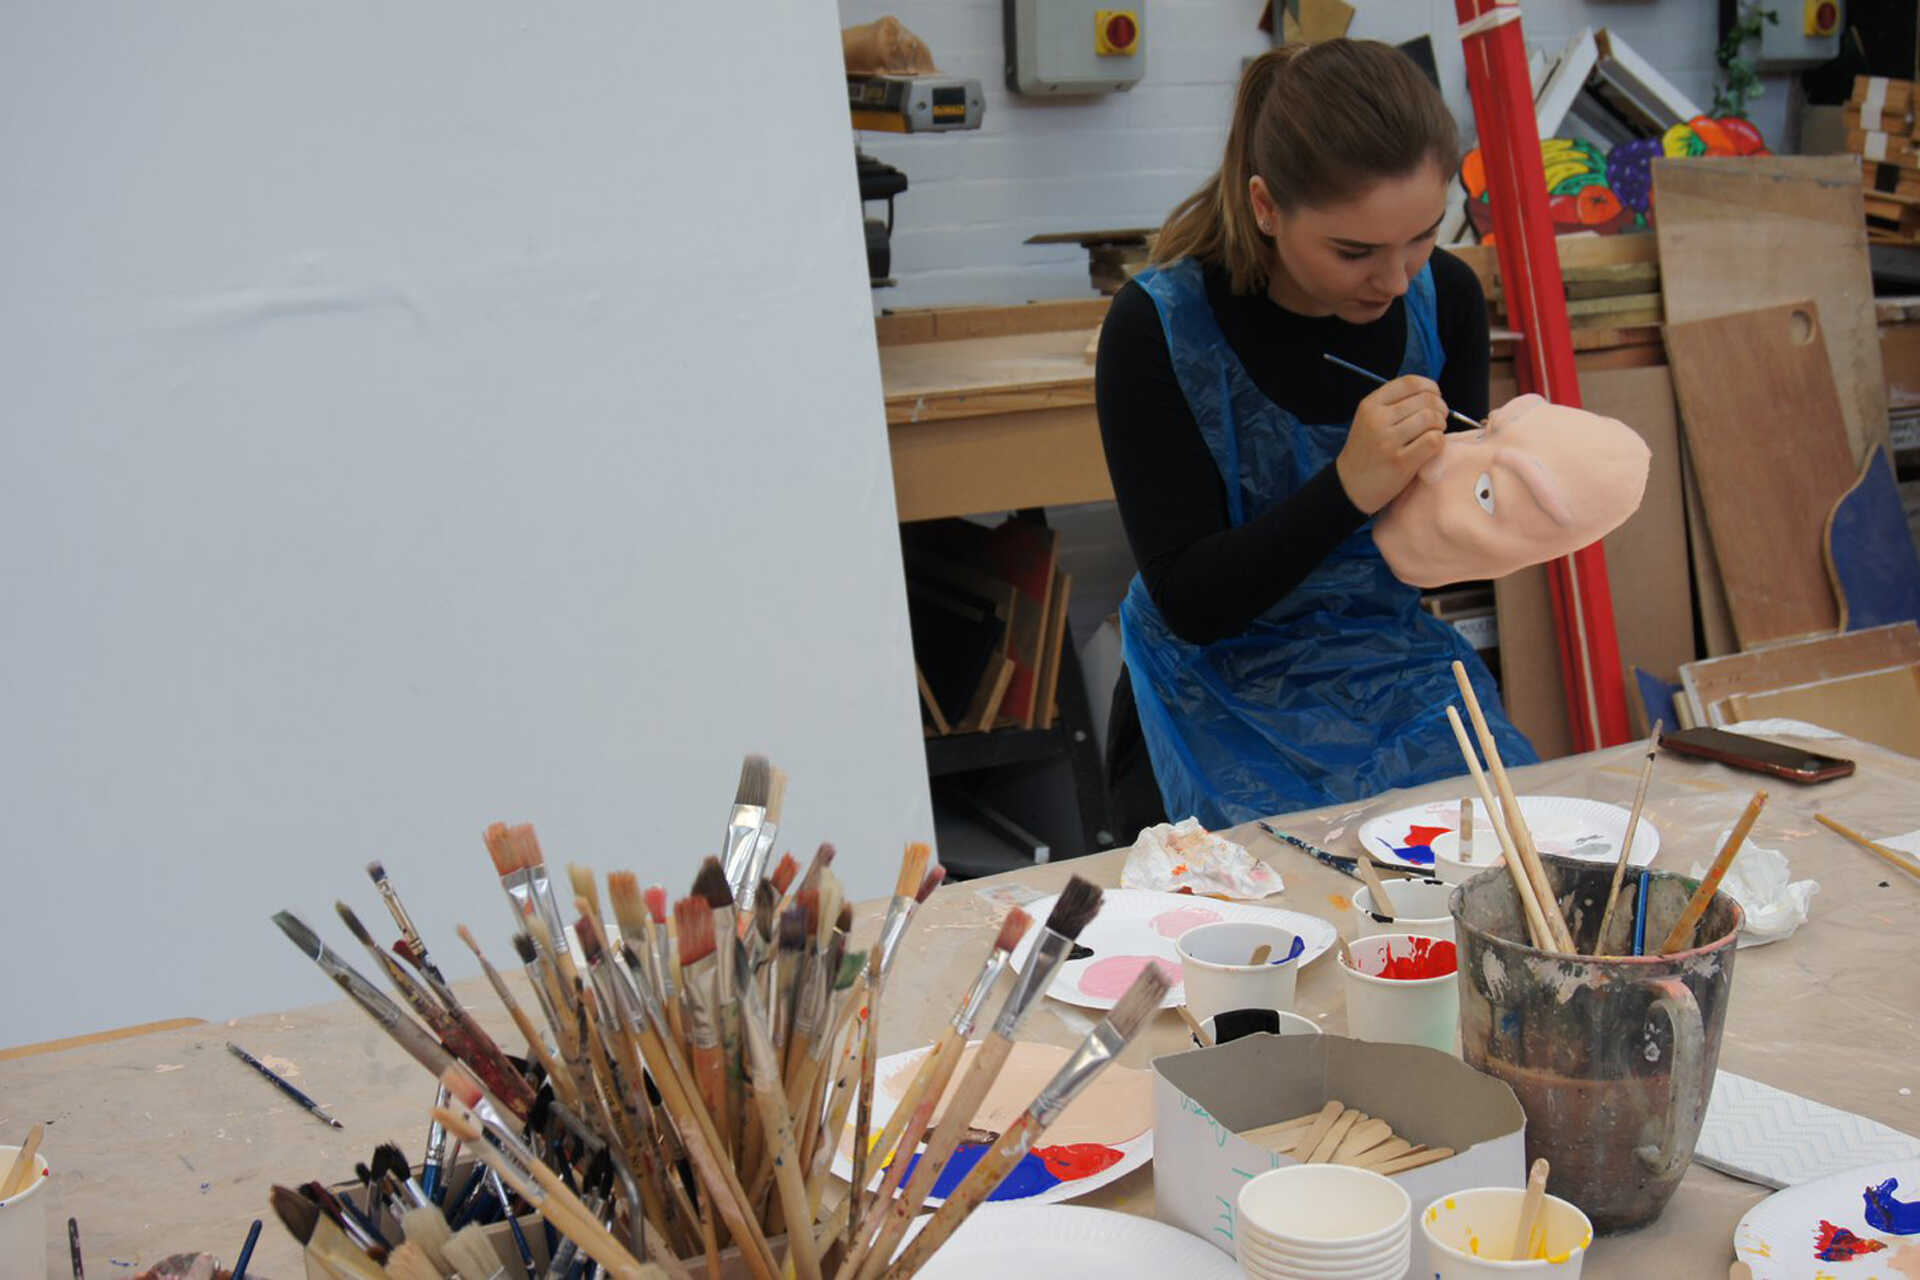 A student undertaking practical work in the School of Arts